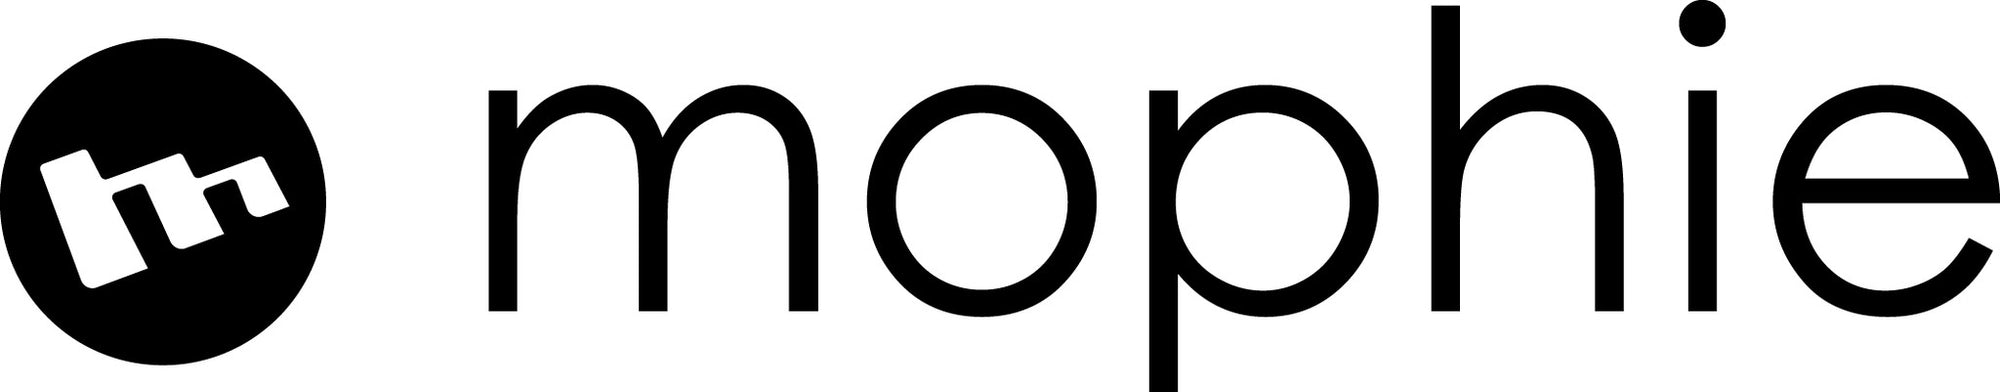 Mac-Addict Establishes Direct Partnership with MOPHIE